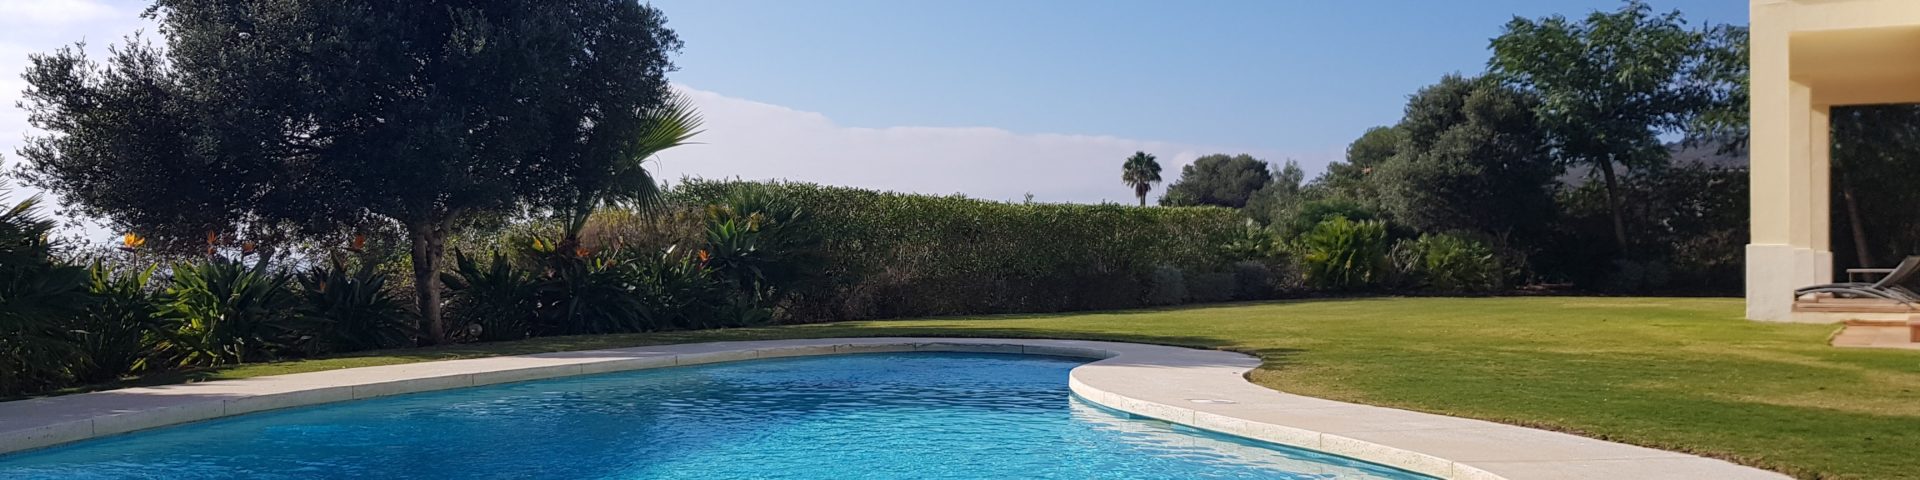 Photo of the private pool, garden a